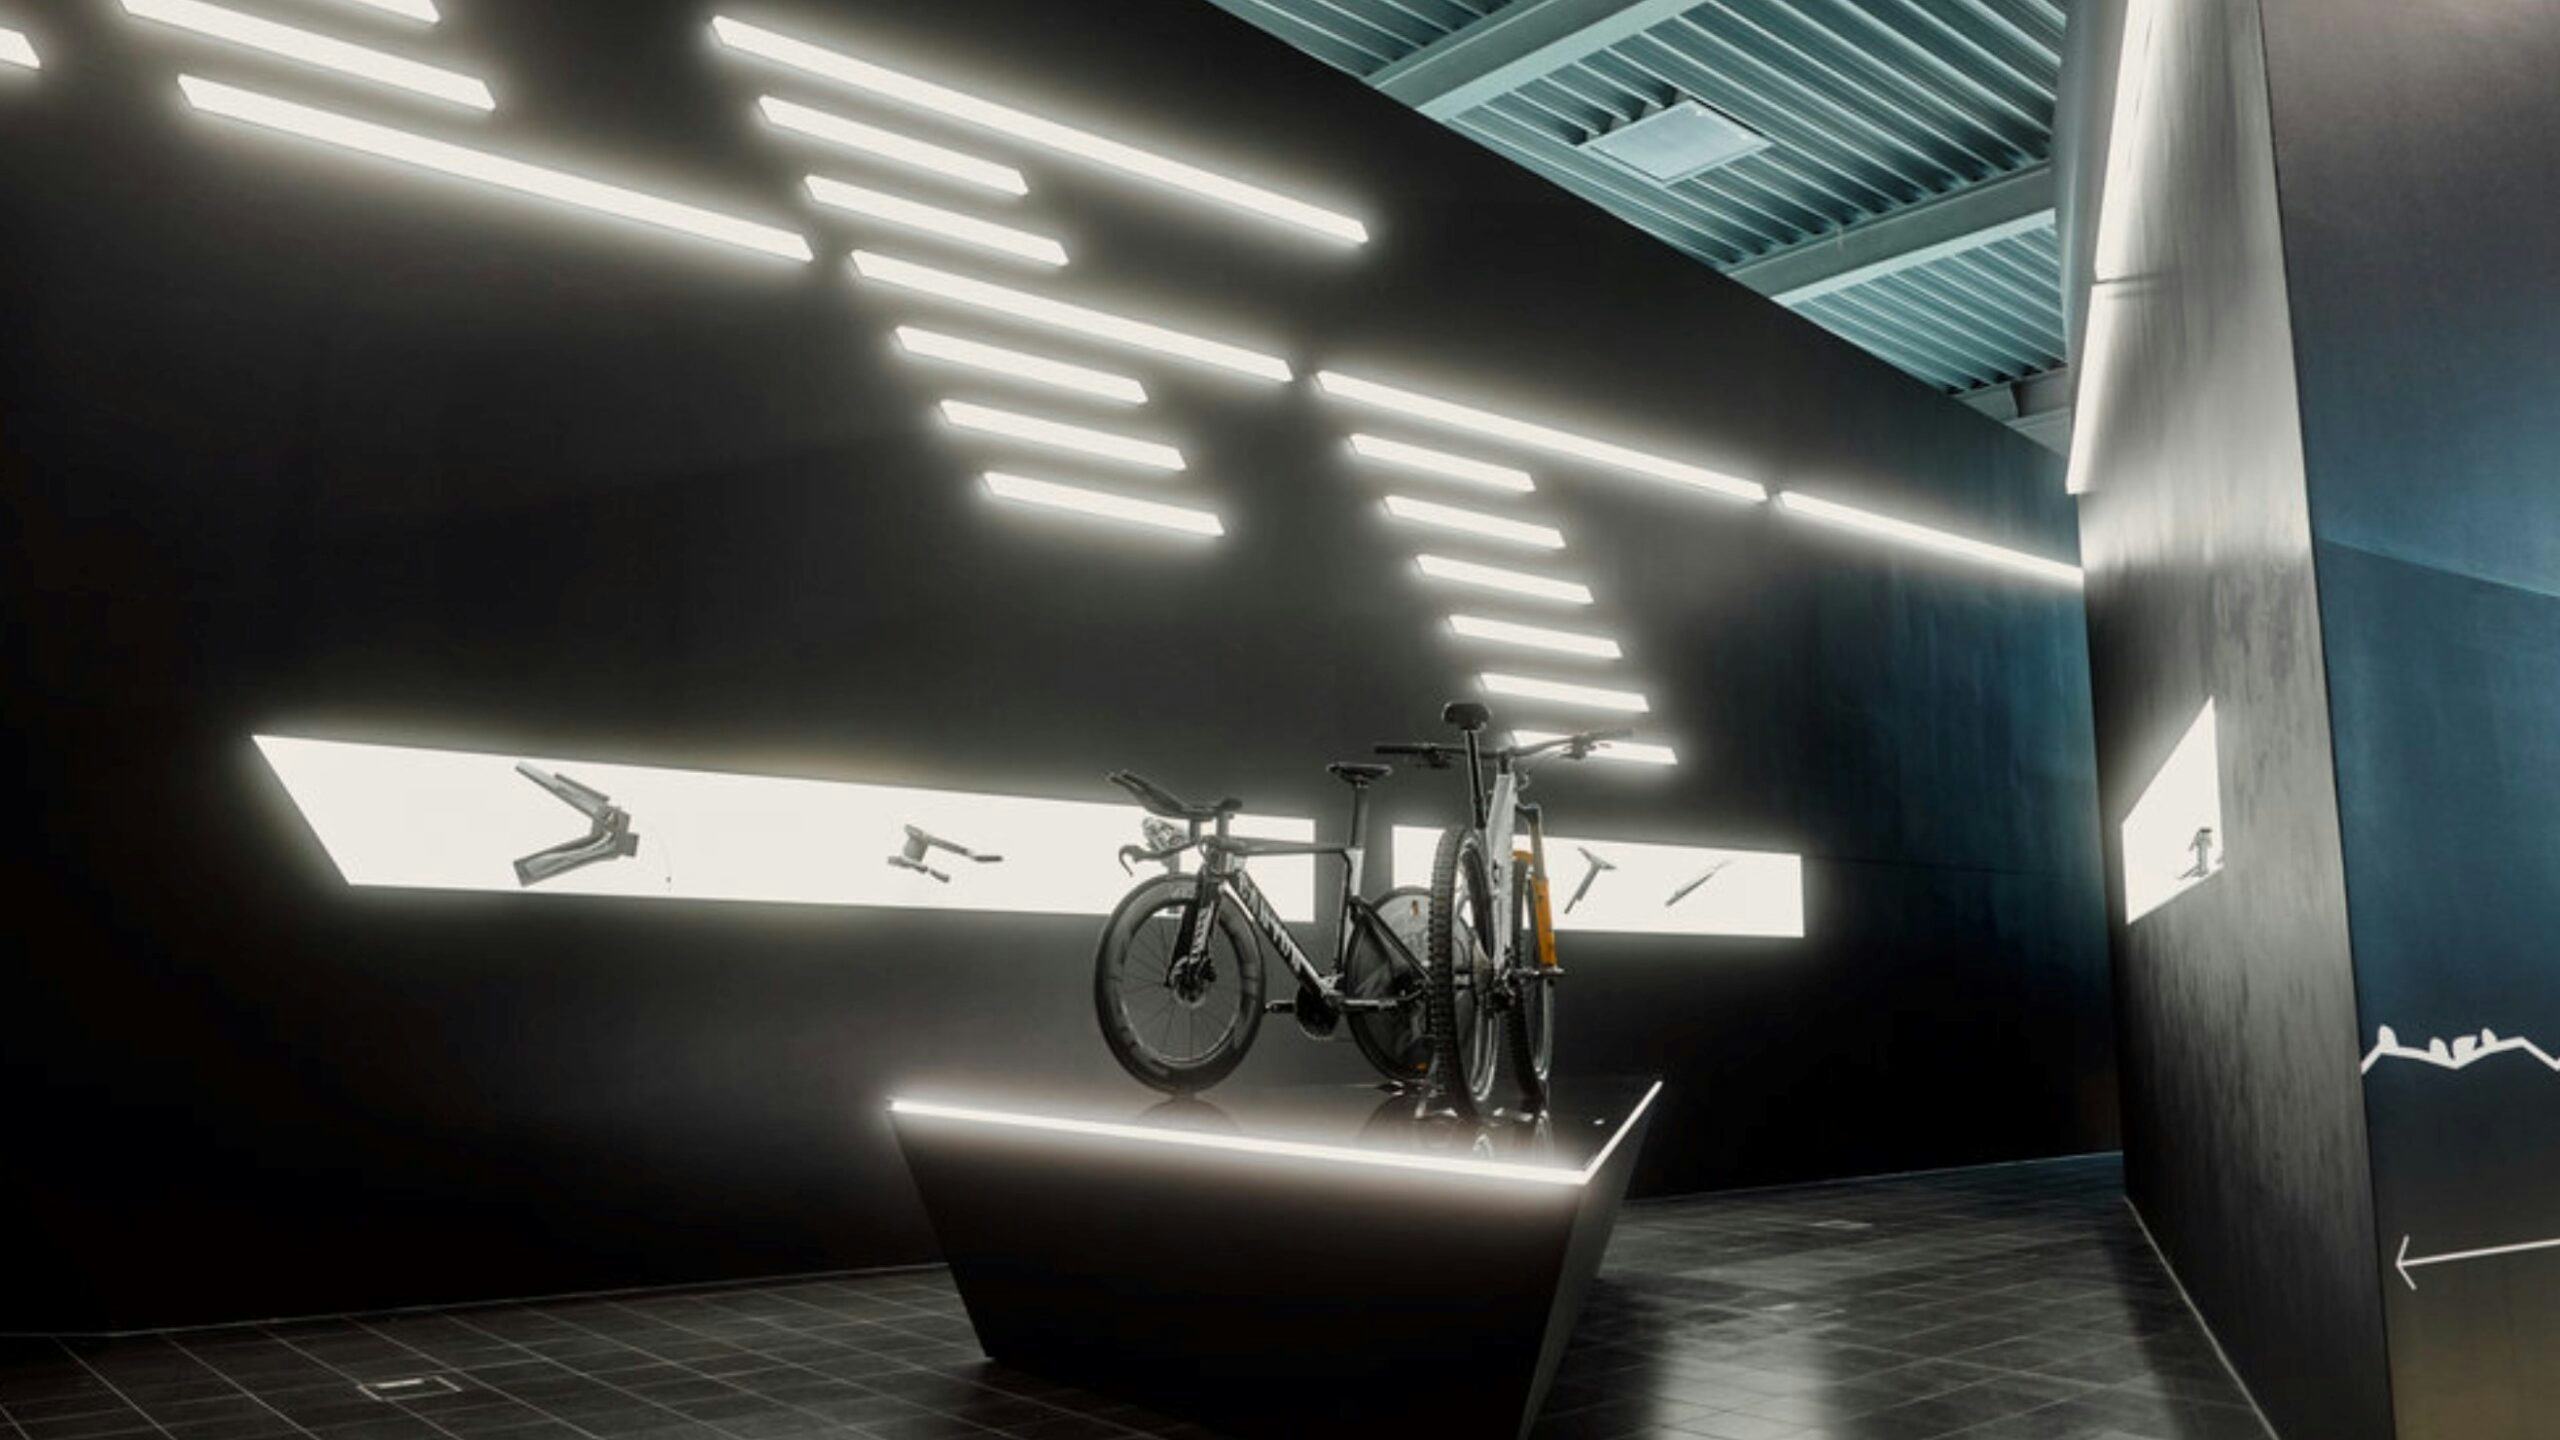 New at Canyon's Koblenz HQ location: Innovation Lab. – Photo Canyon Bicycles